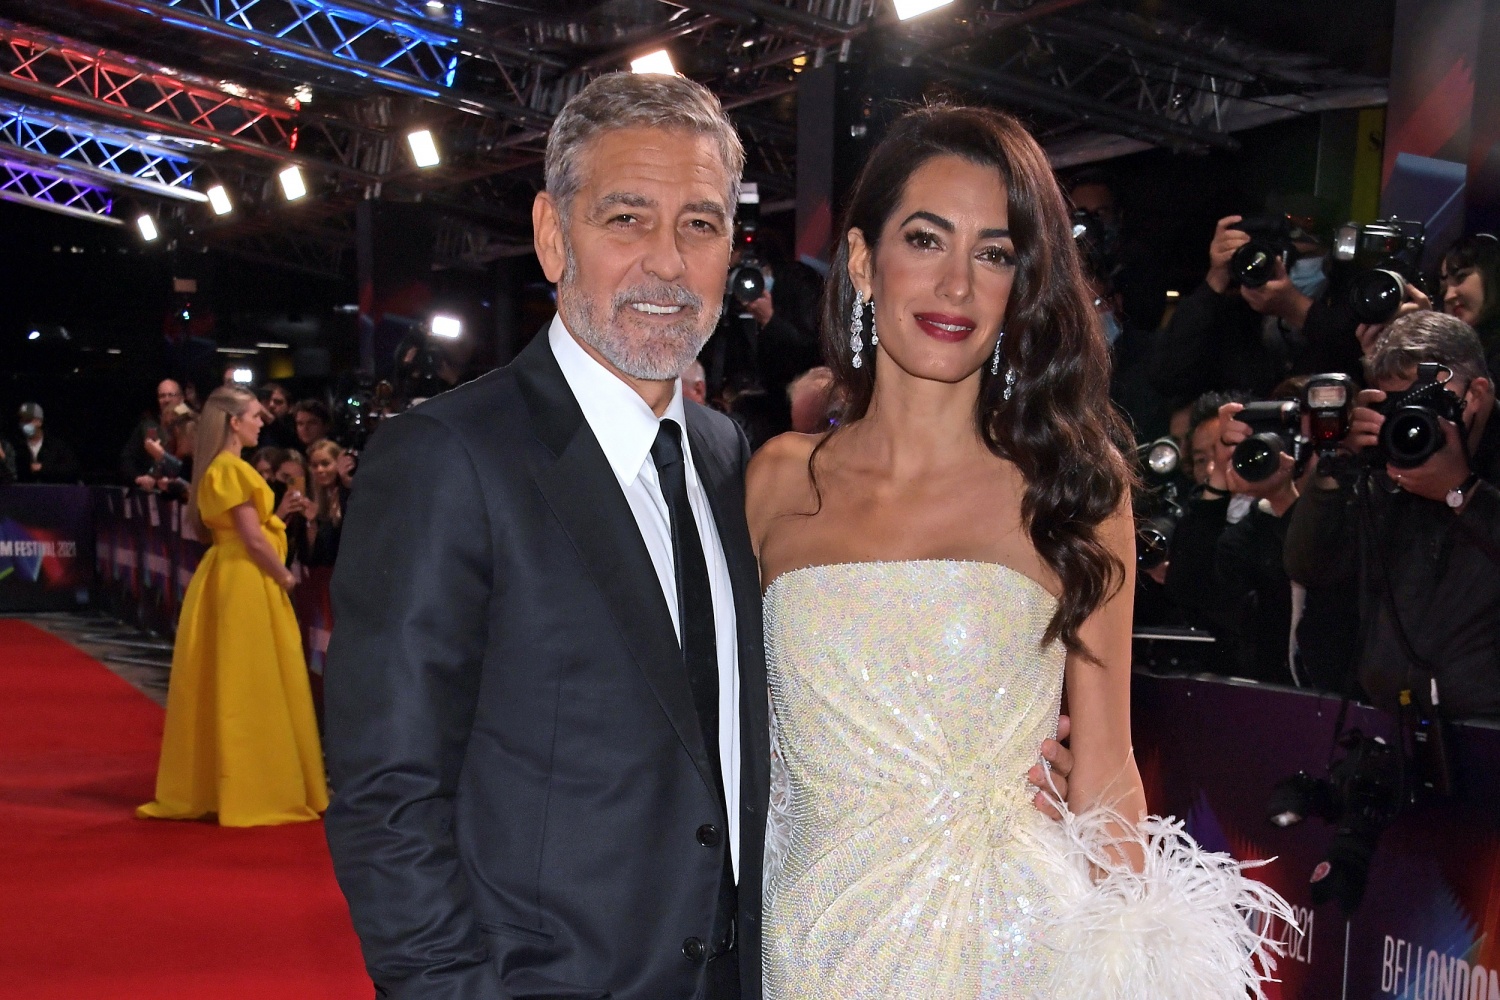 George Clooney and Amal Clooney attend the Premiere of "The Tender Bar" during the 65th BFI London Film Festival at The Royal Festival Hall on October 10, 2021 in London, England. 